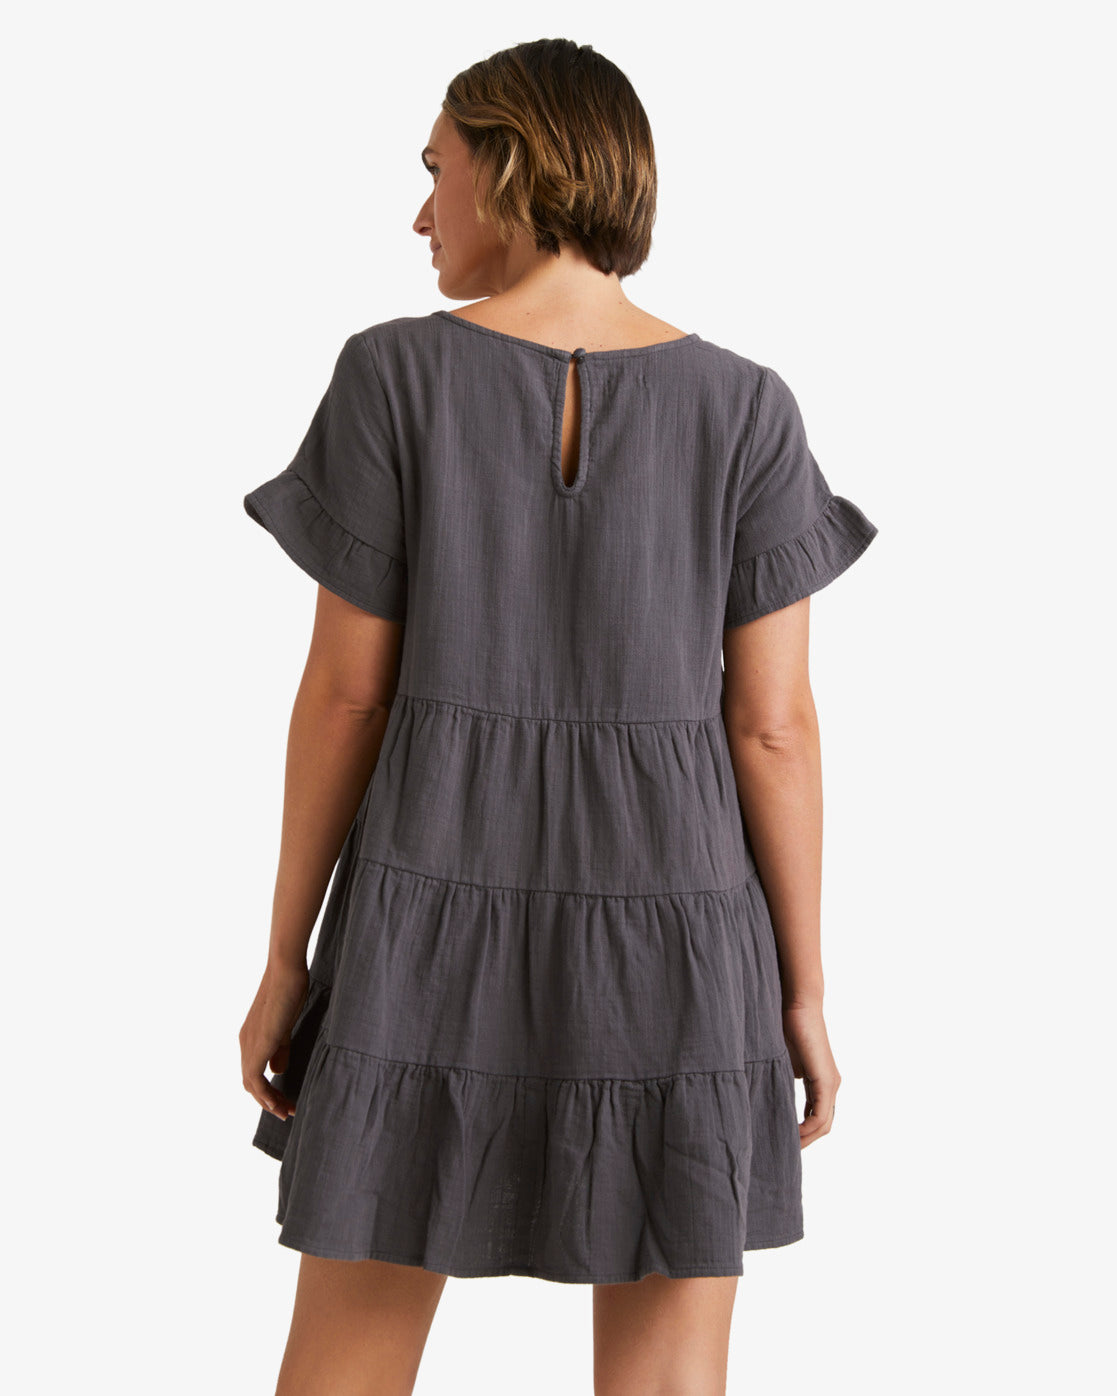 Billabong Pixie Dress in washed black on model from rear